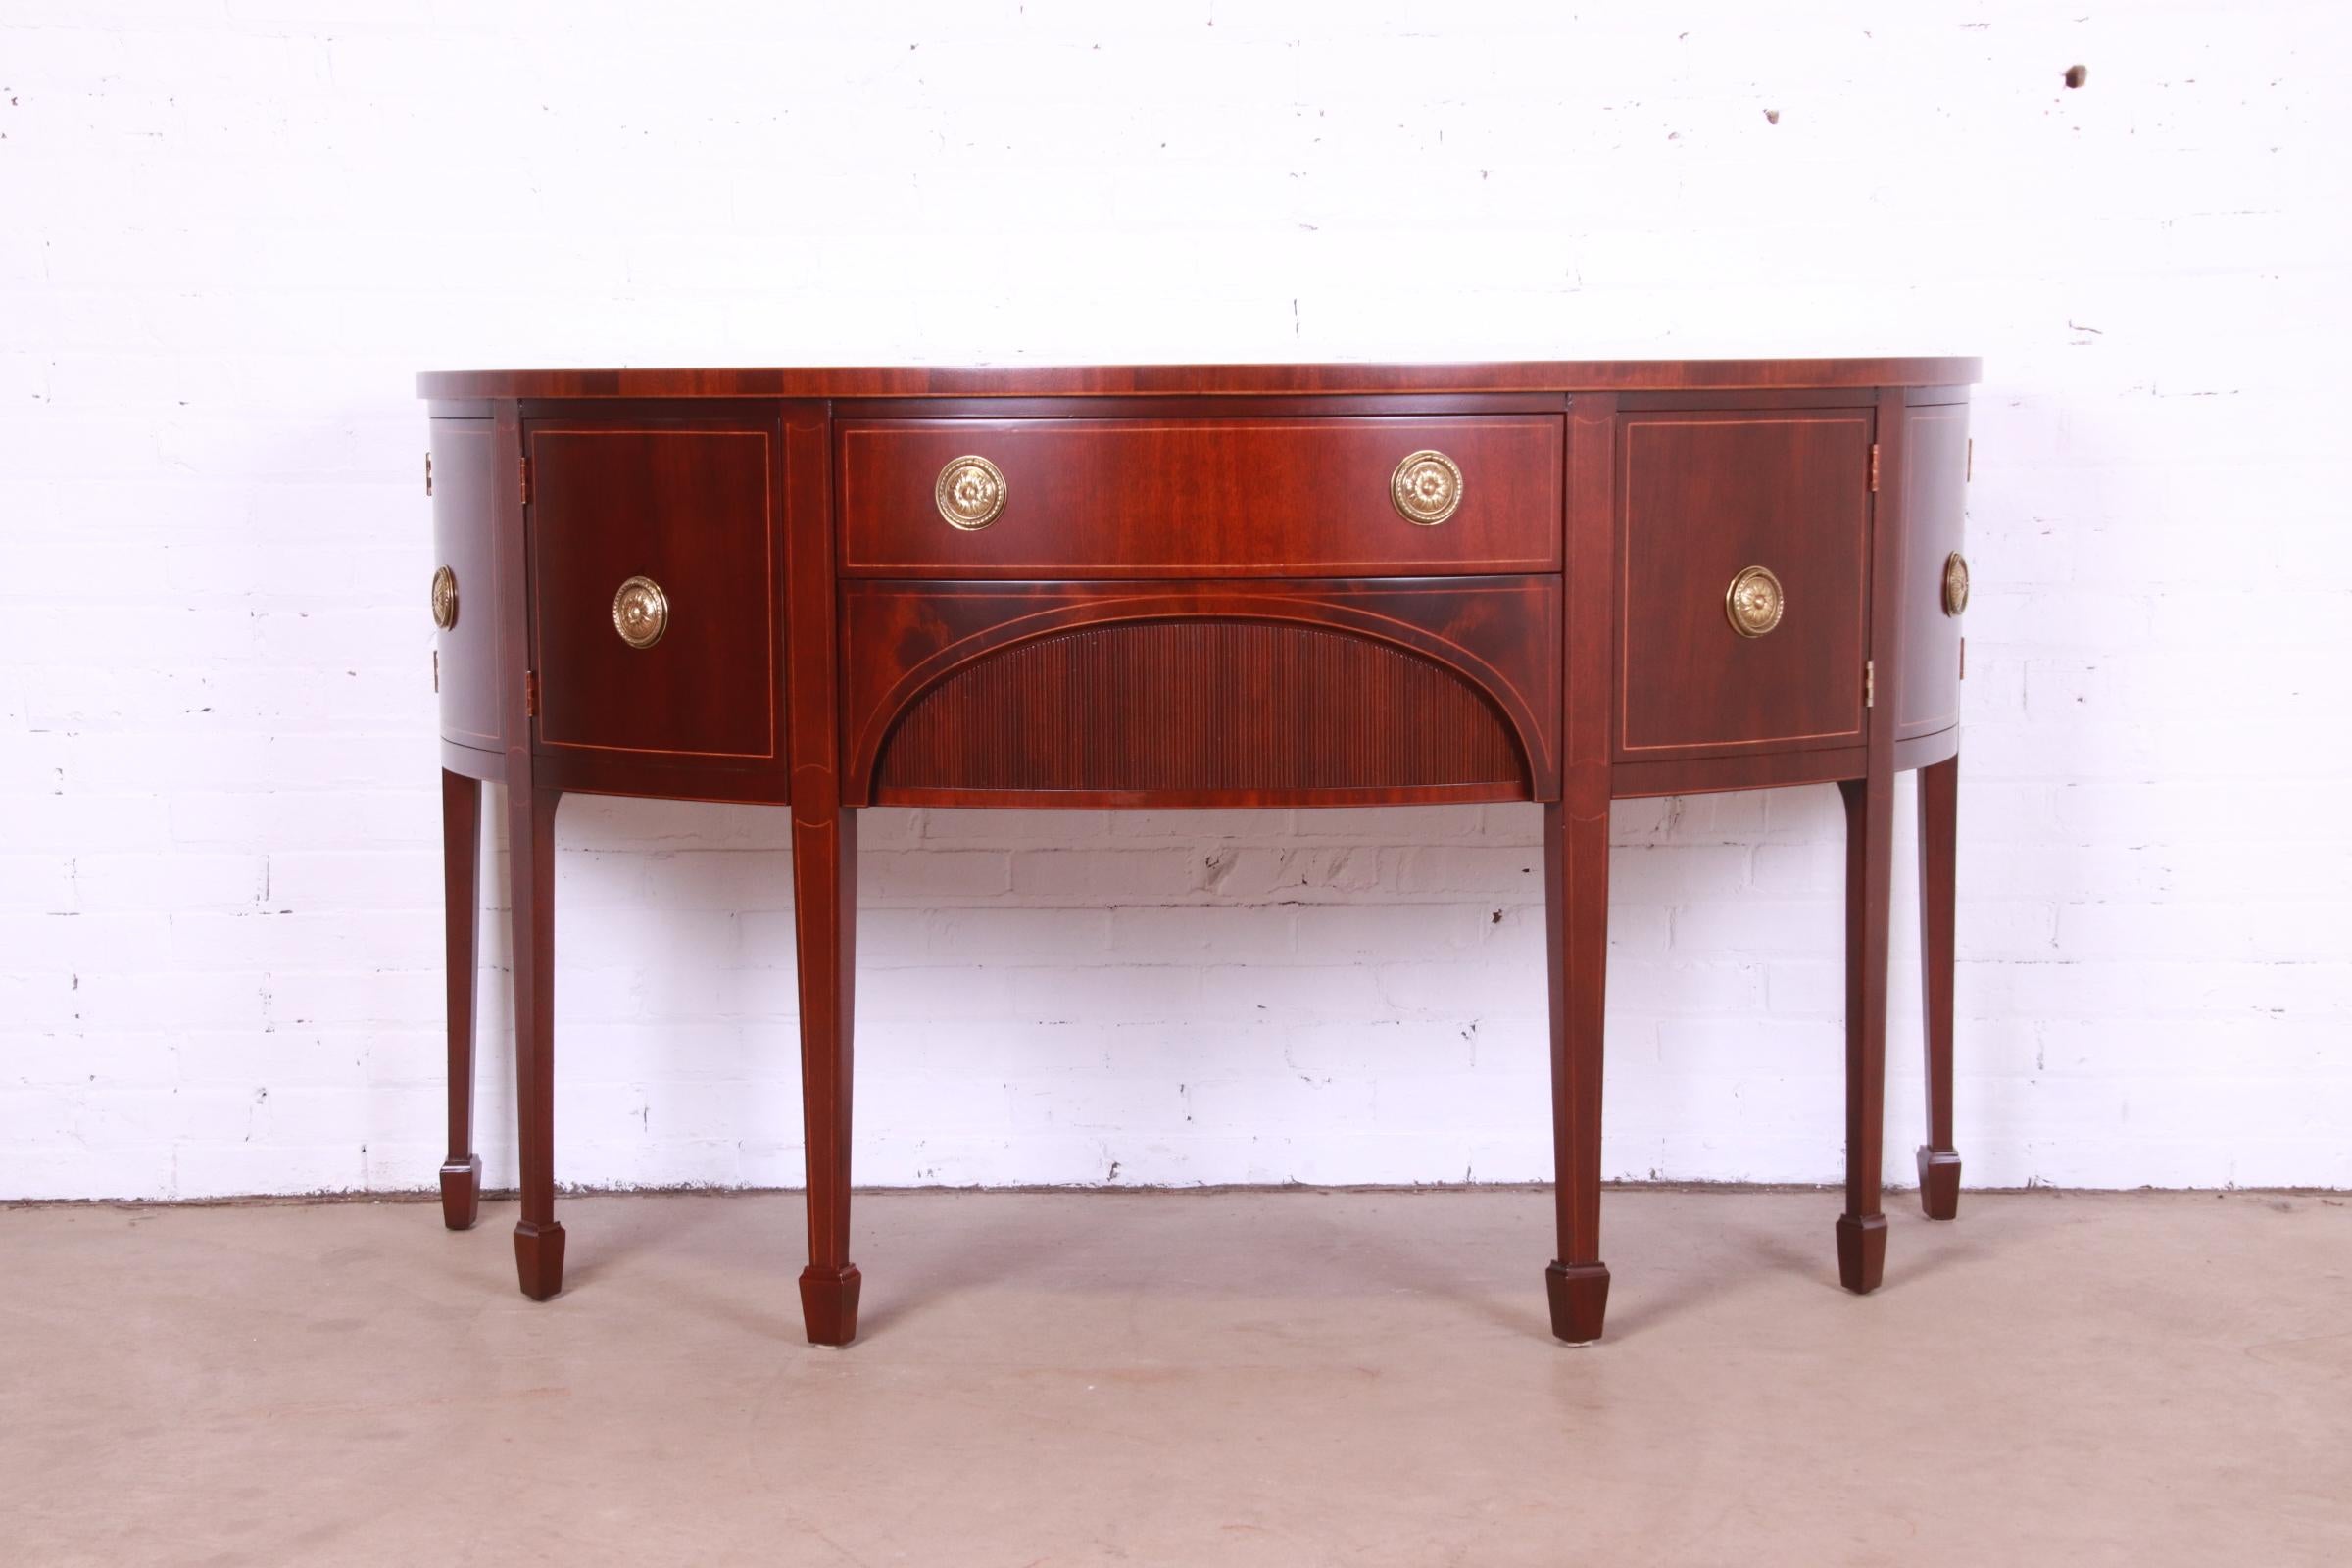 An exceptional Federal or Hepplewhite style demilune cabinet or sideboard

By Baker Furniture

USA, Circa 1980s

Mahogany, with satinwood string inlay, original brass hardware, and felt silverware insert.

Measures: 66